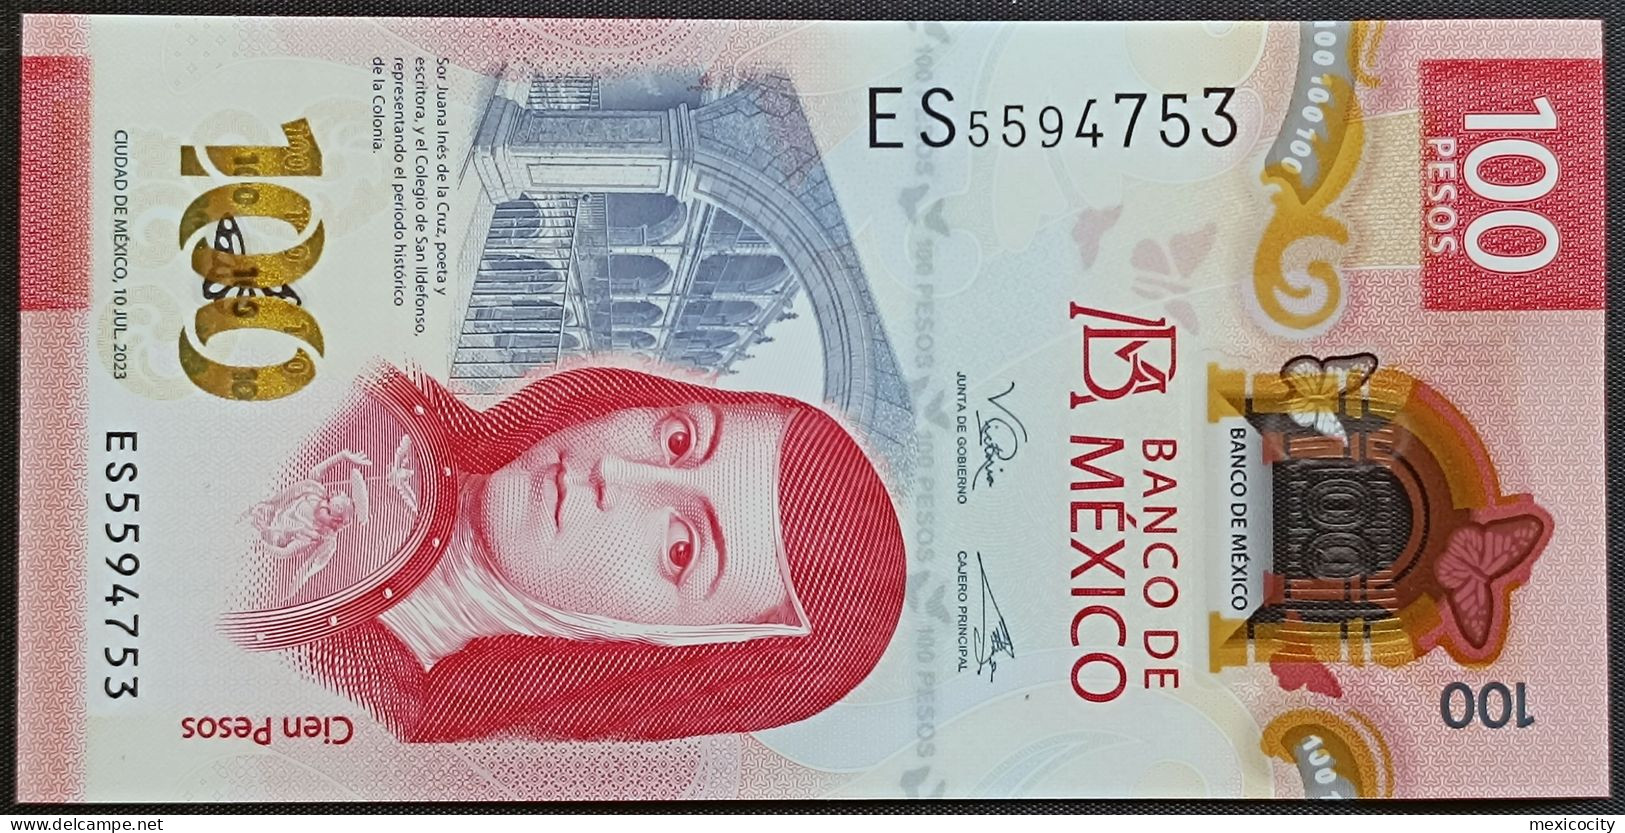 MEXICO $100 ! SERIES ES 10-July-2023 DATE ! Victoria R. Sign. SOR JUANA POLYMER NOTE Mint BU Crisp Read Descr. For Notes - Mexico